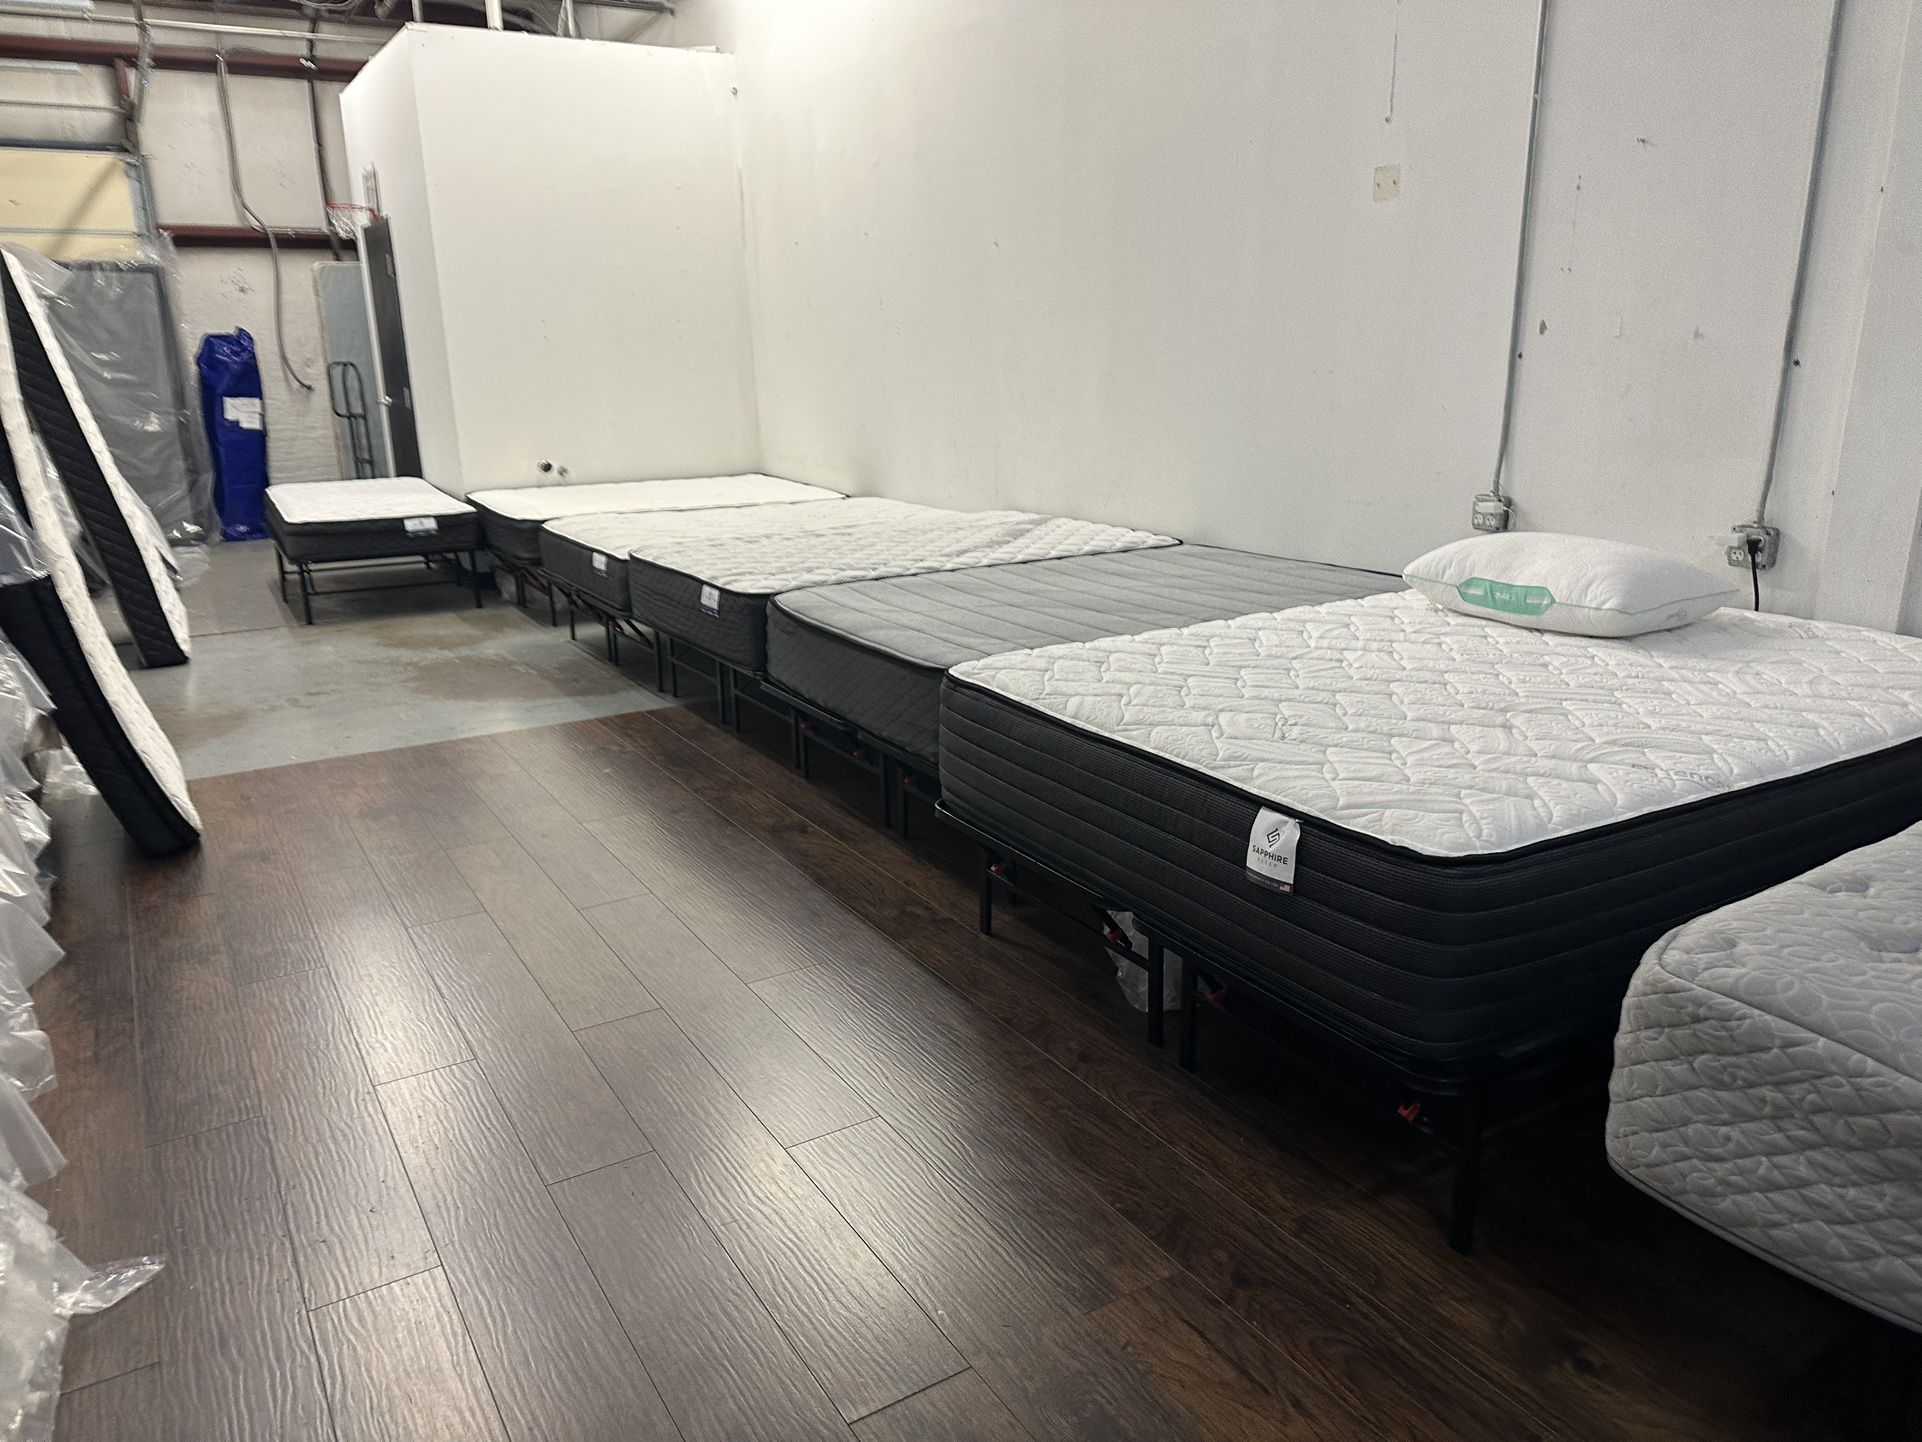 Get a Queen Mattress for just $20 (more info in details)